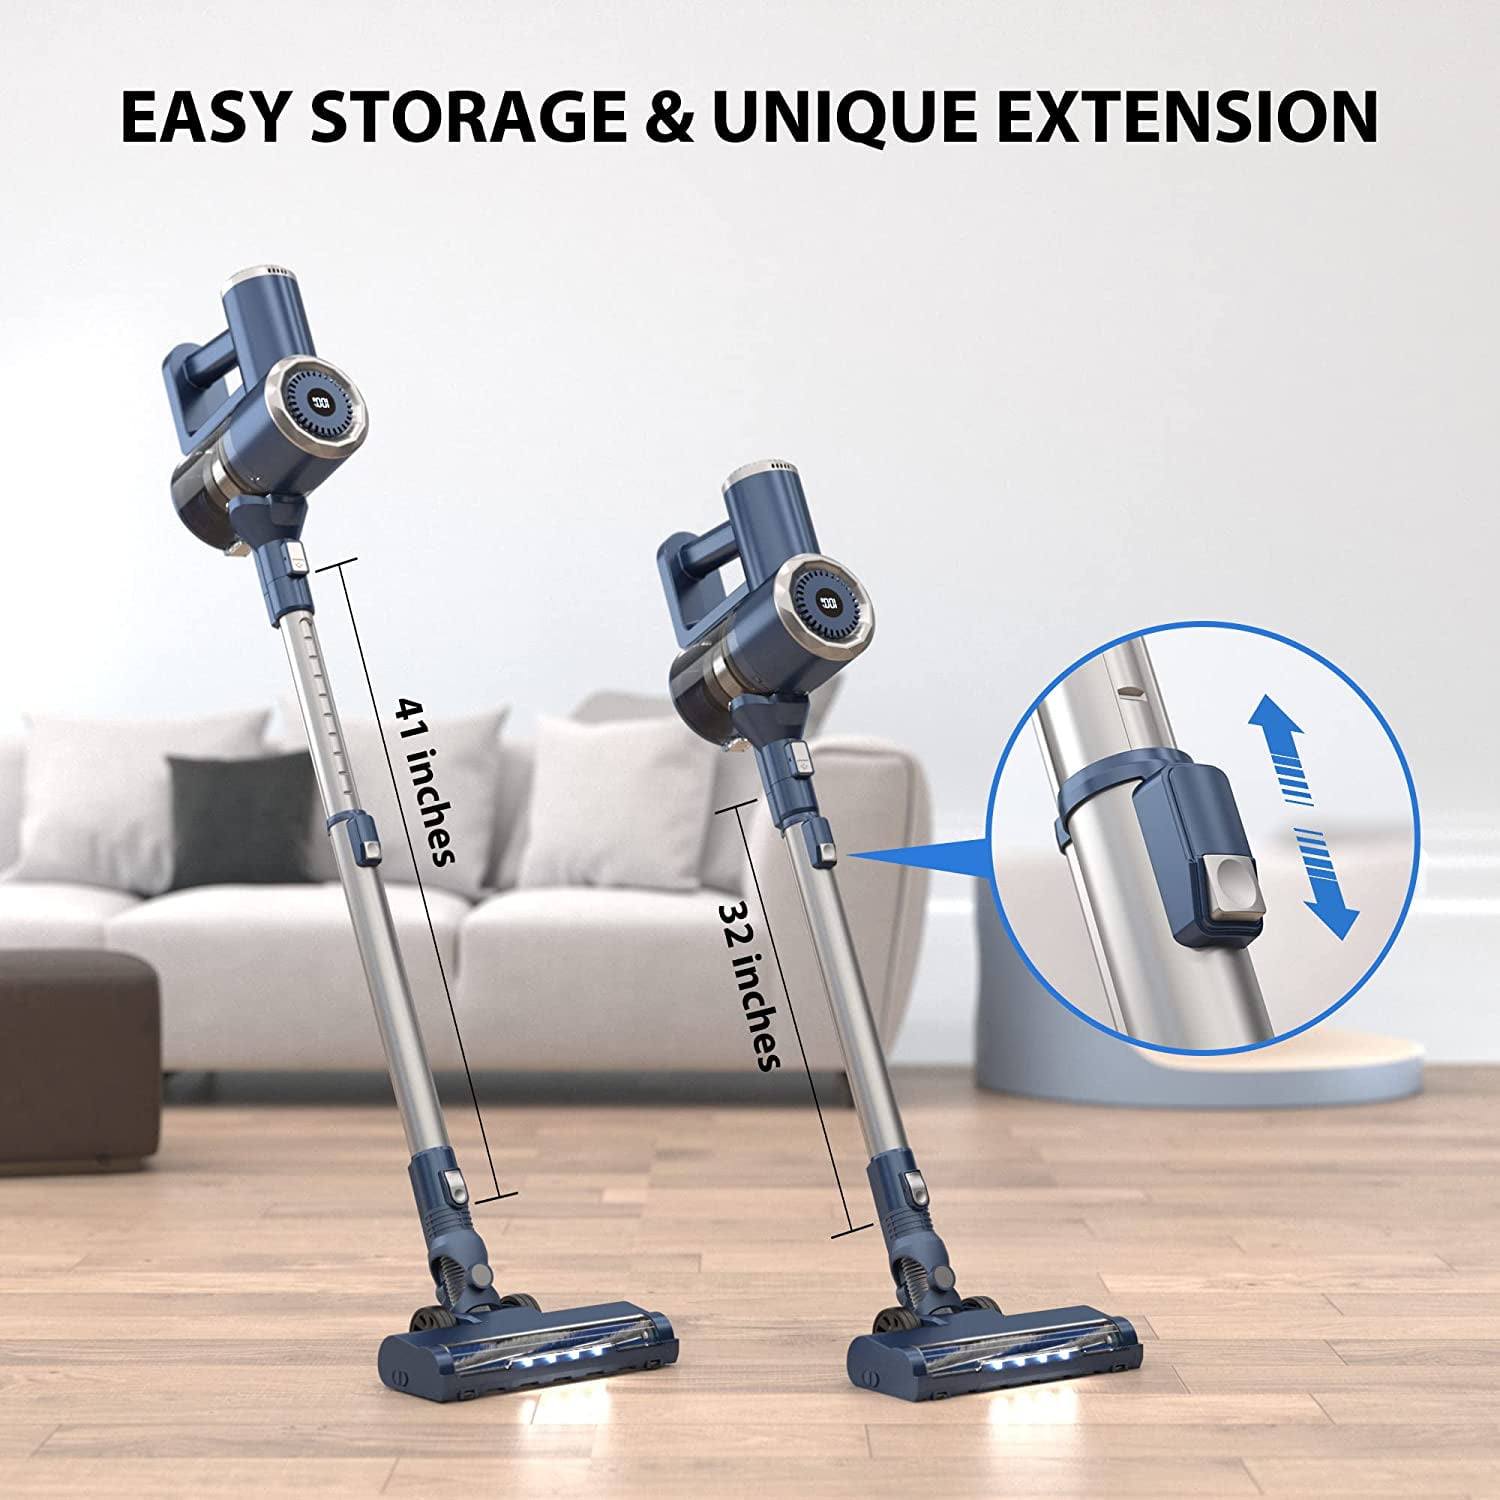 PrettyCare Cordless Lightweight Stick Vacuum Cleaner for sale online